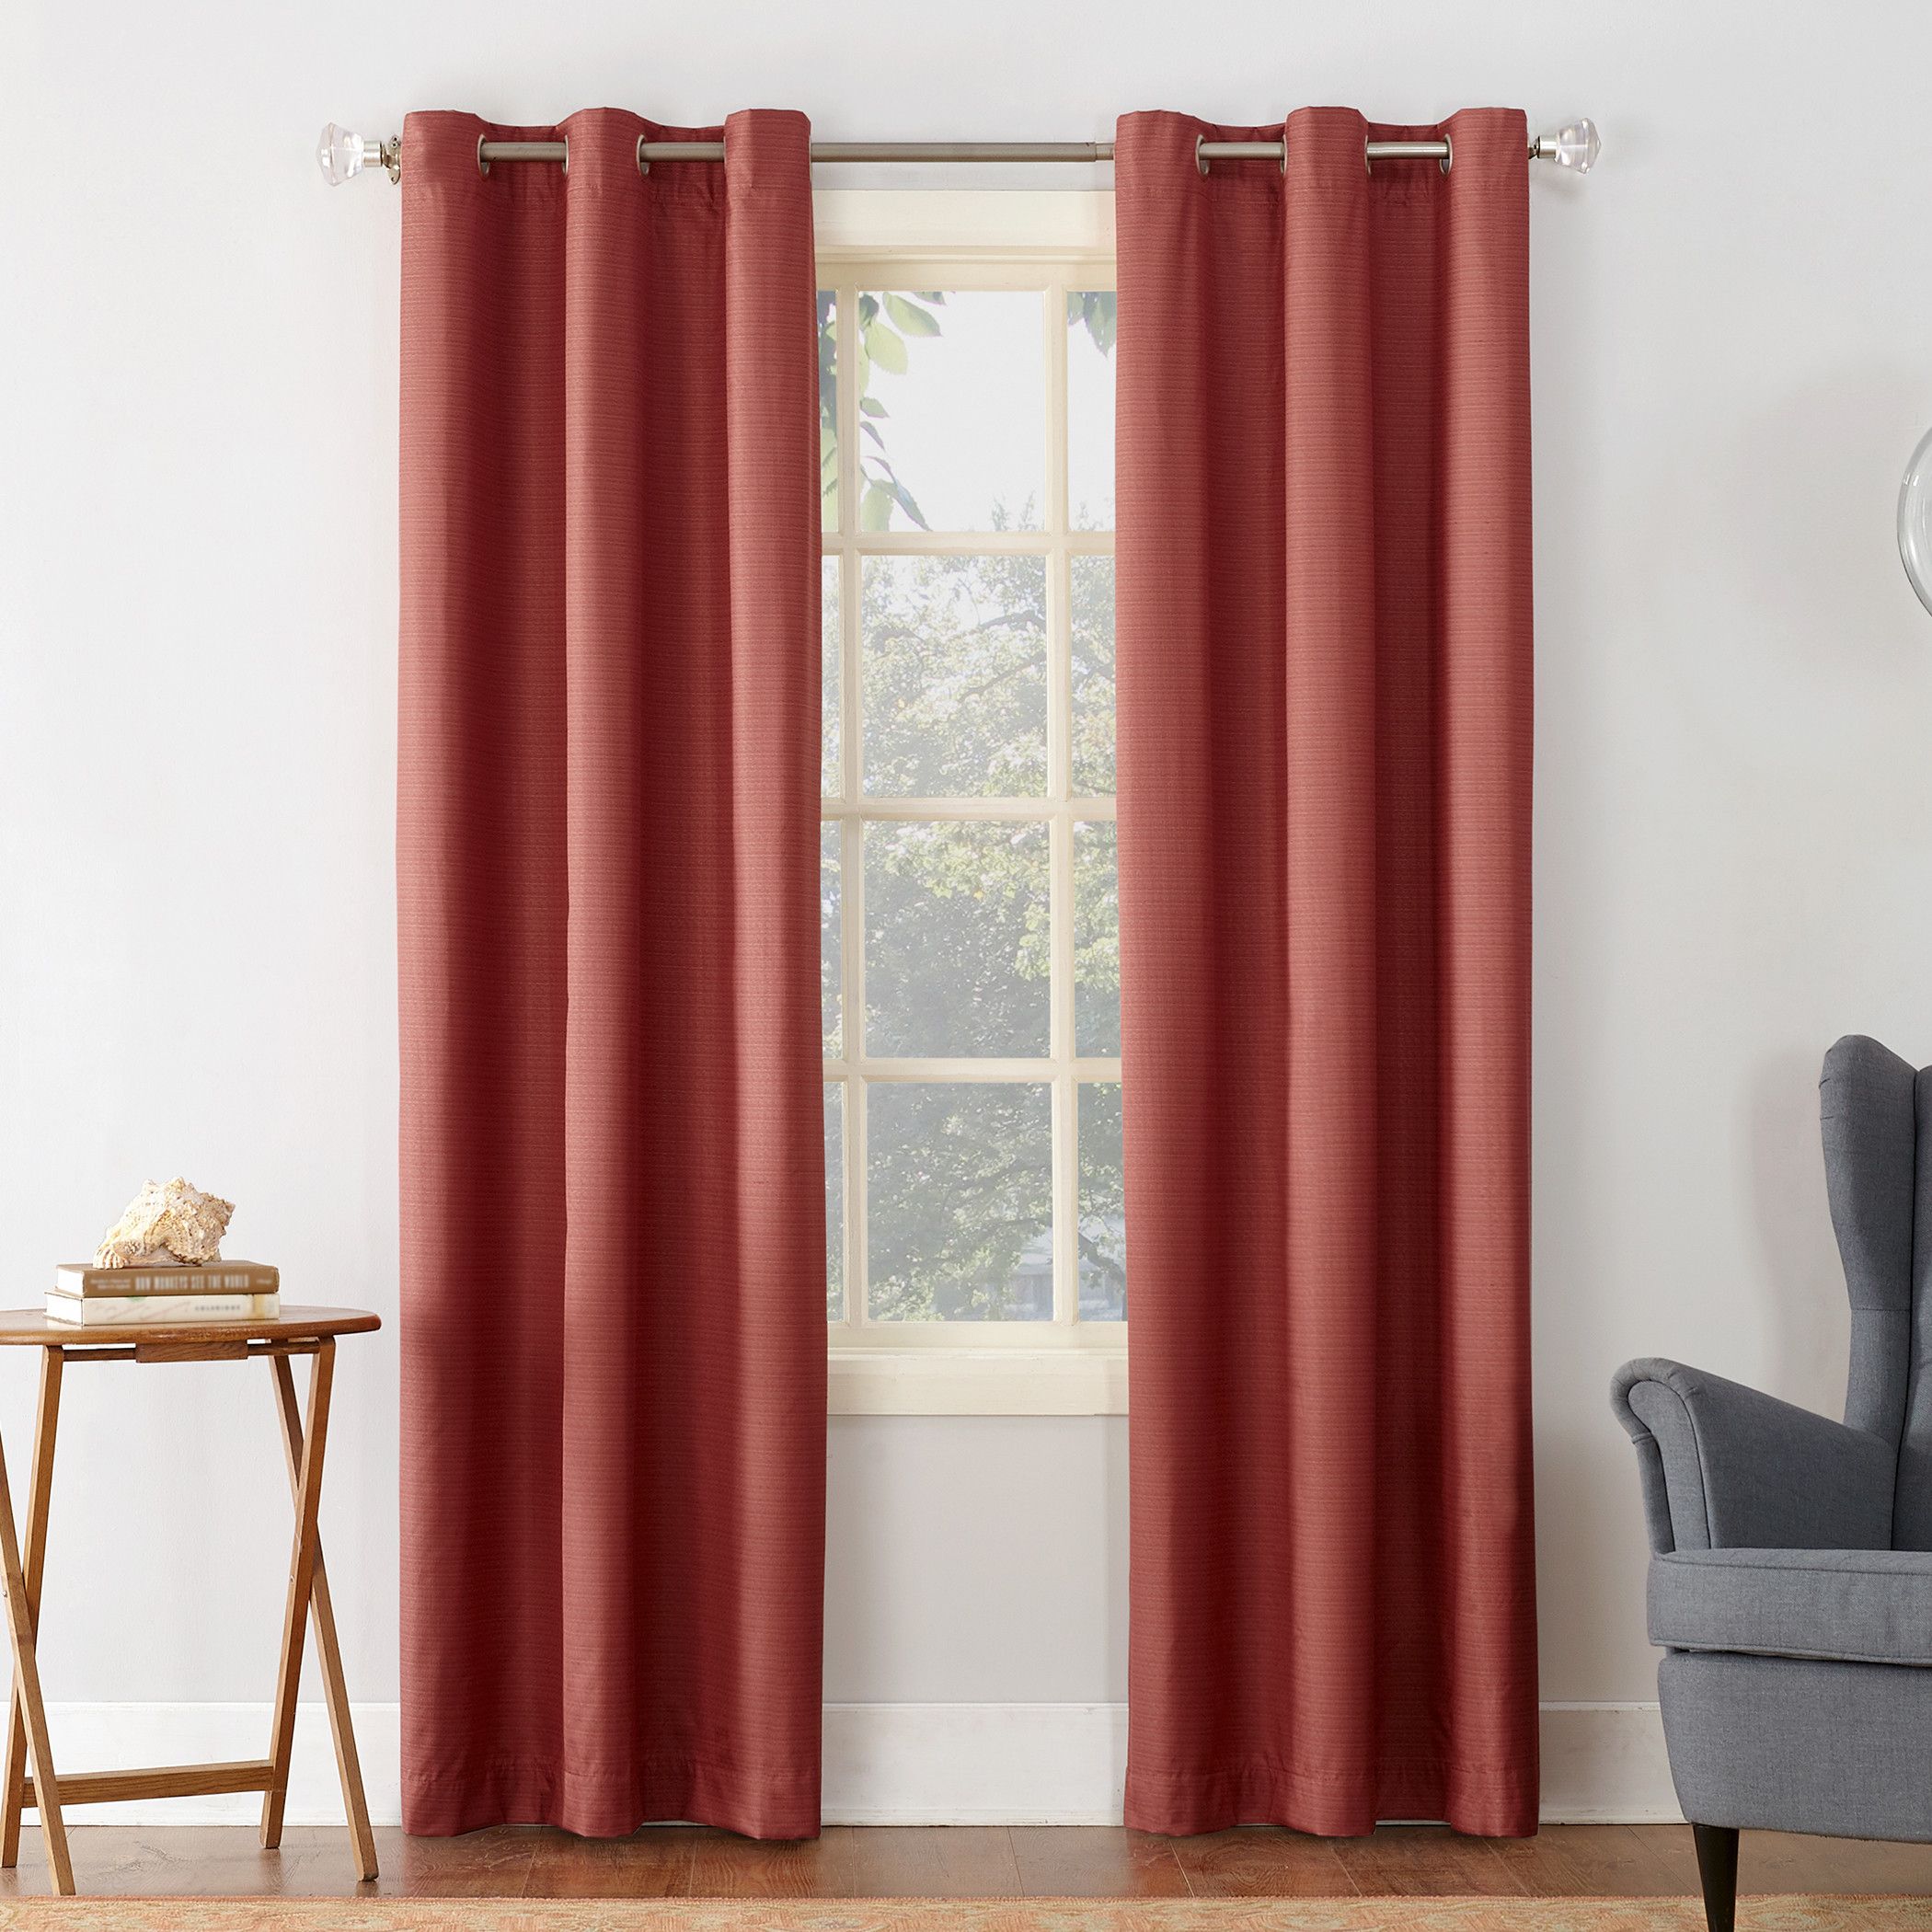 Sun Zero Cooper Textured Thermal Lined Room Darkening Energy Regarding Geometric Print Textured Thermal Insulated Grommet Curtain Panels (View 10 of 20)